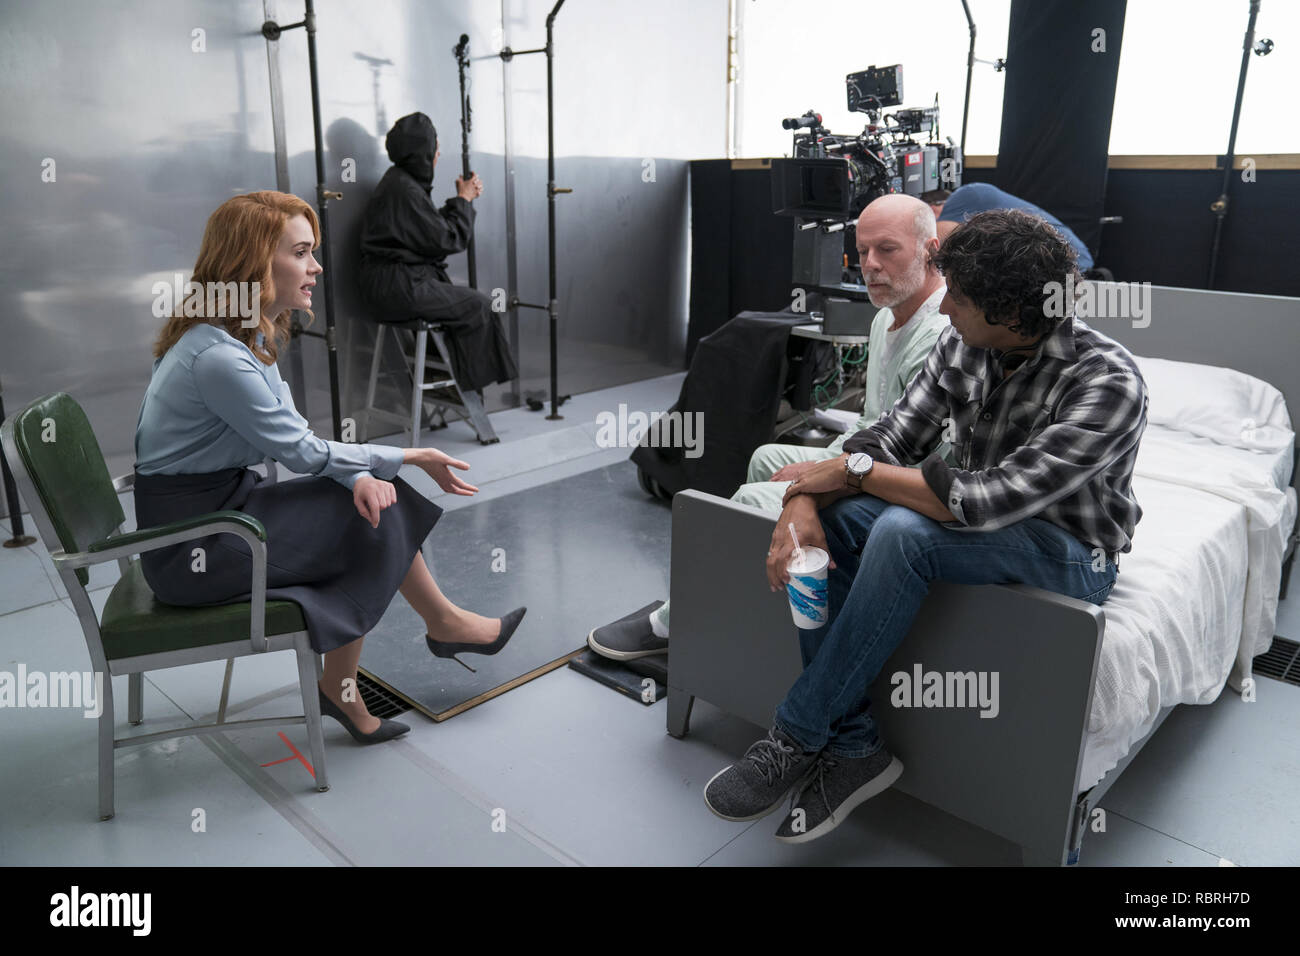 (from left) Sarah Paulson, who plays Dr. Ellie Staple, Bruce Willis, who plays David Dunn/The Overseer, and writer-director M. Night Shyamalan on the set of 'Glass.'Photo Credit: Universal Pictures / The Hollywood Archive Stock Photo